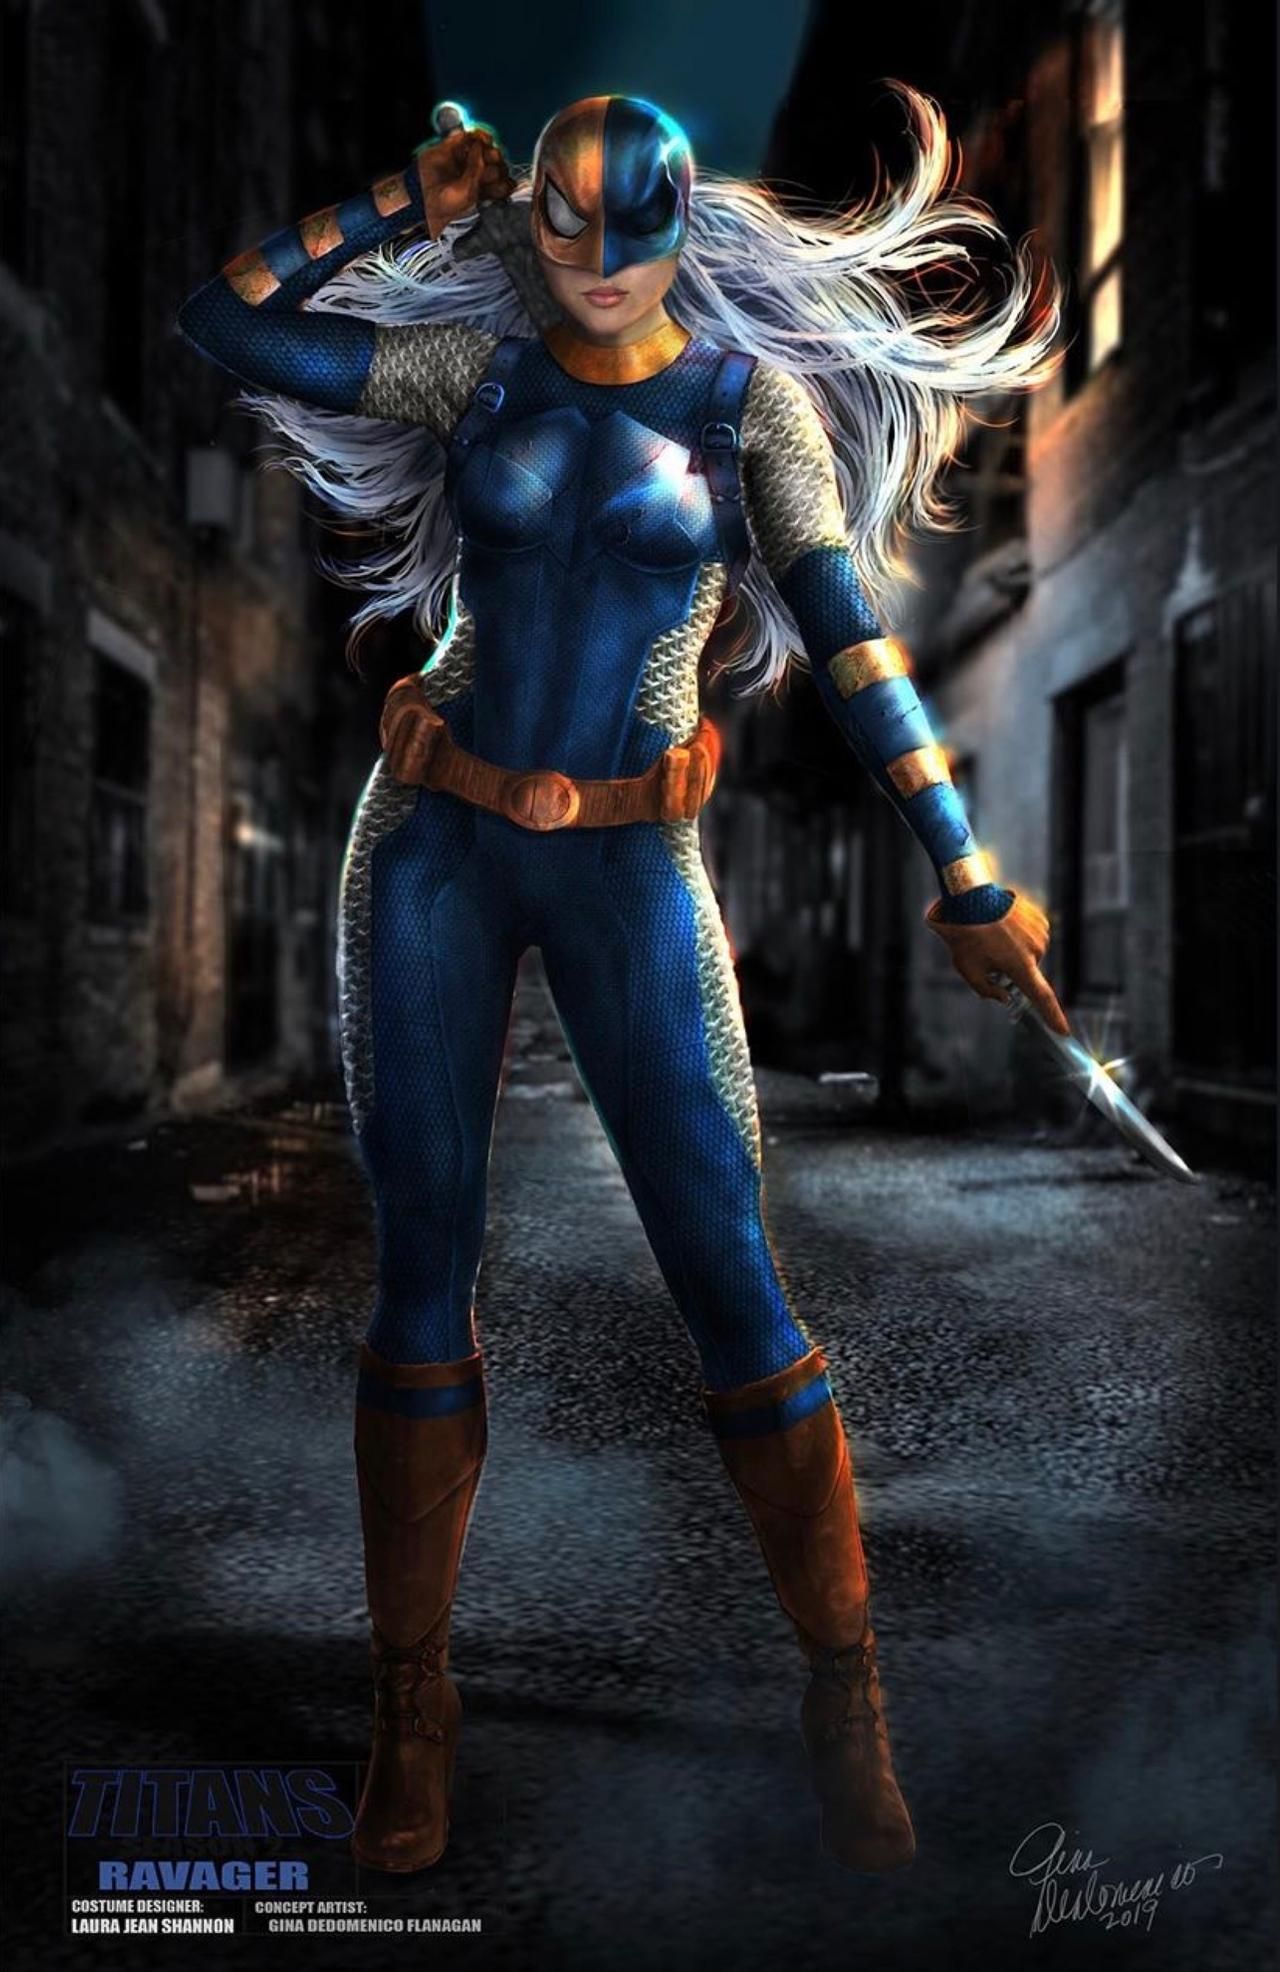 Rose Wilson In Titans Wallpapers